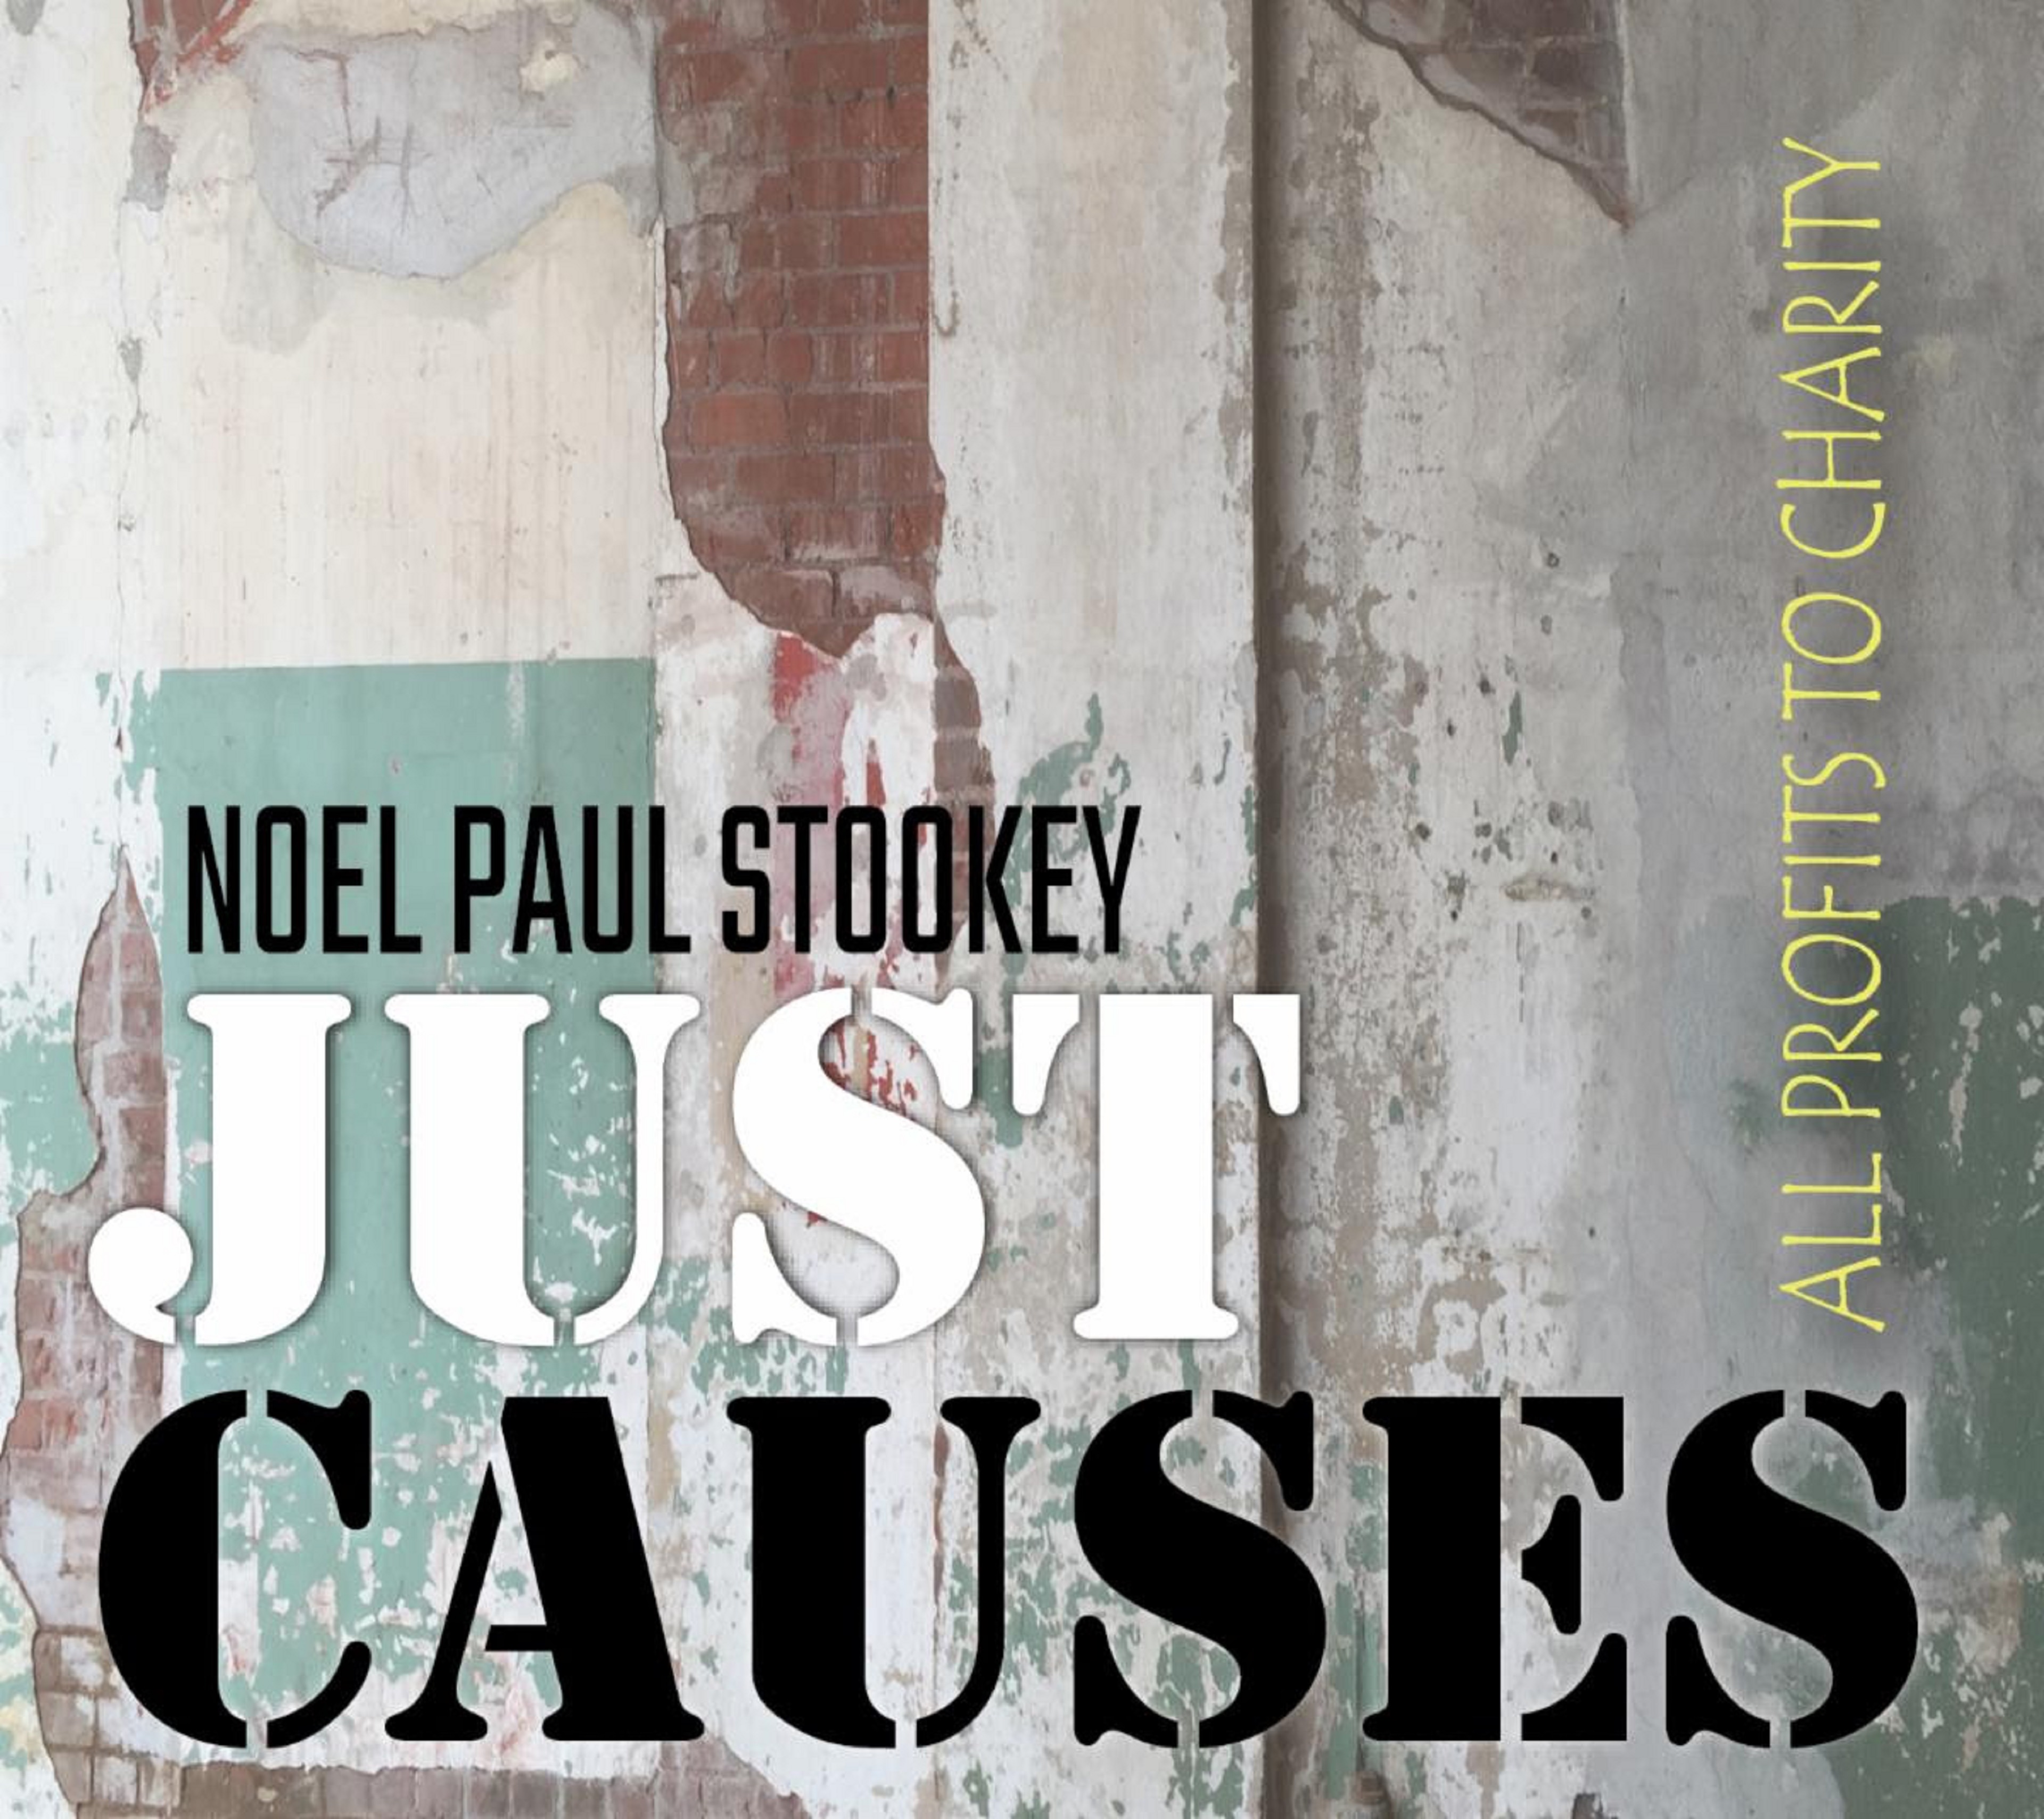 Noel Paul Stookey Continues Lifetime of Activism with "Just Causes" Compilation out March 22